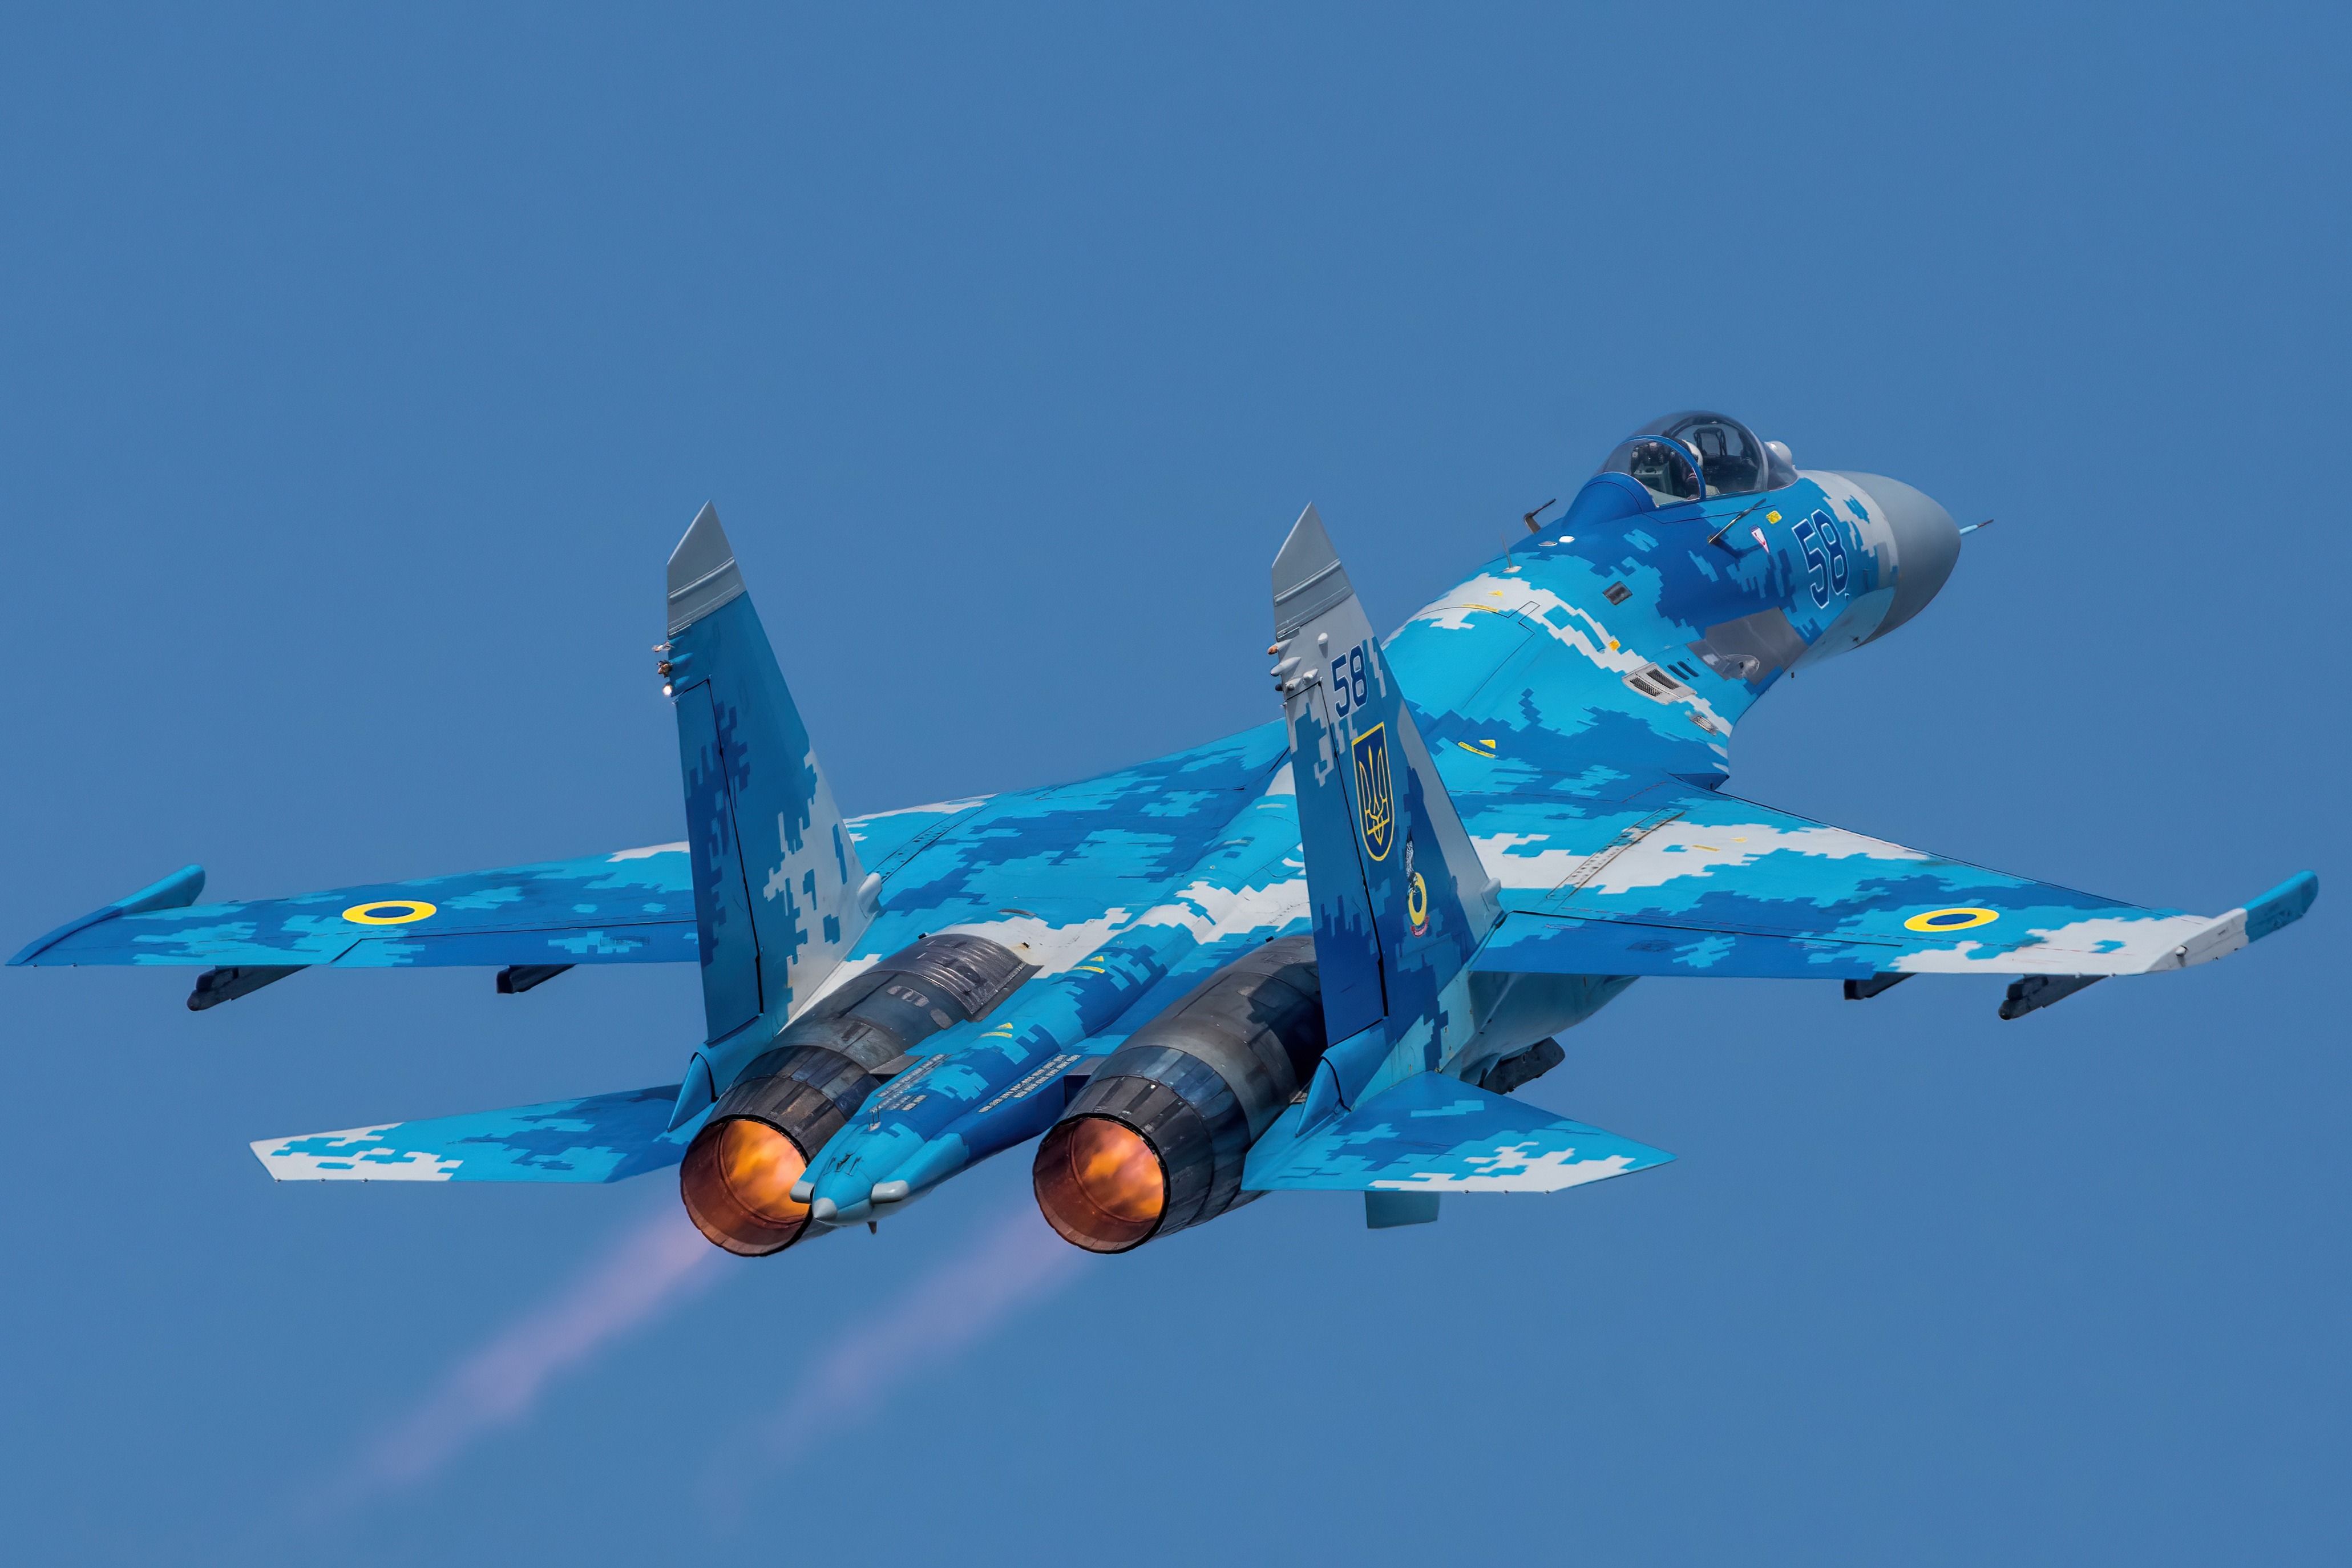 A Ukraine Air Force Sukhoi Su-27 Flying in the sky.